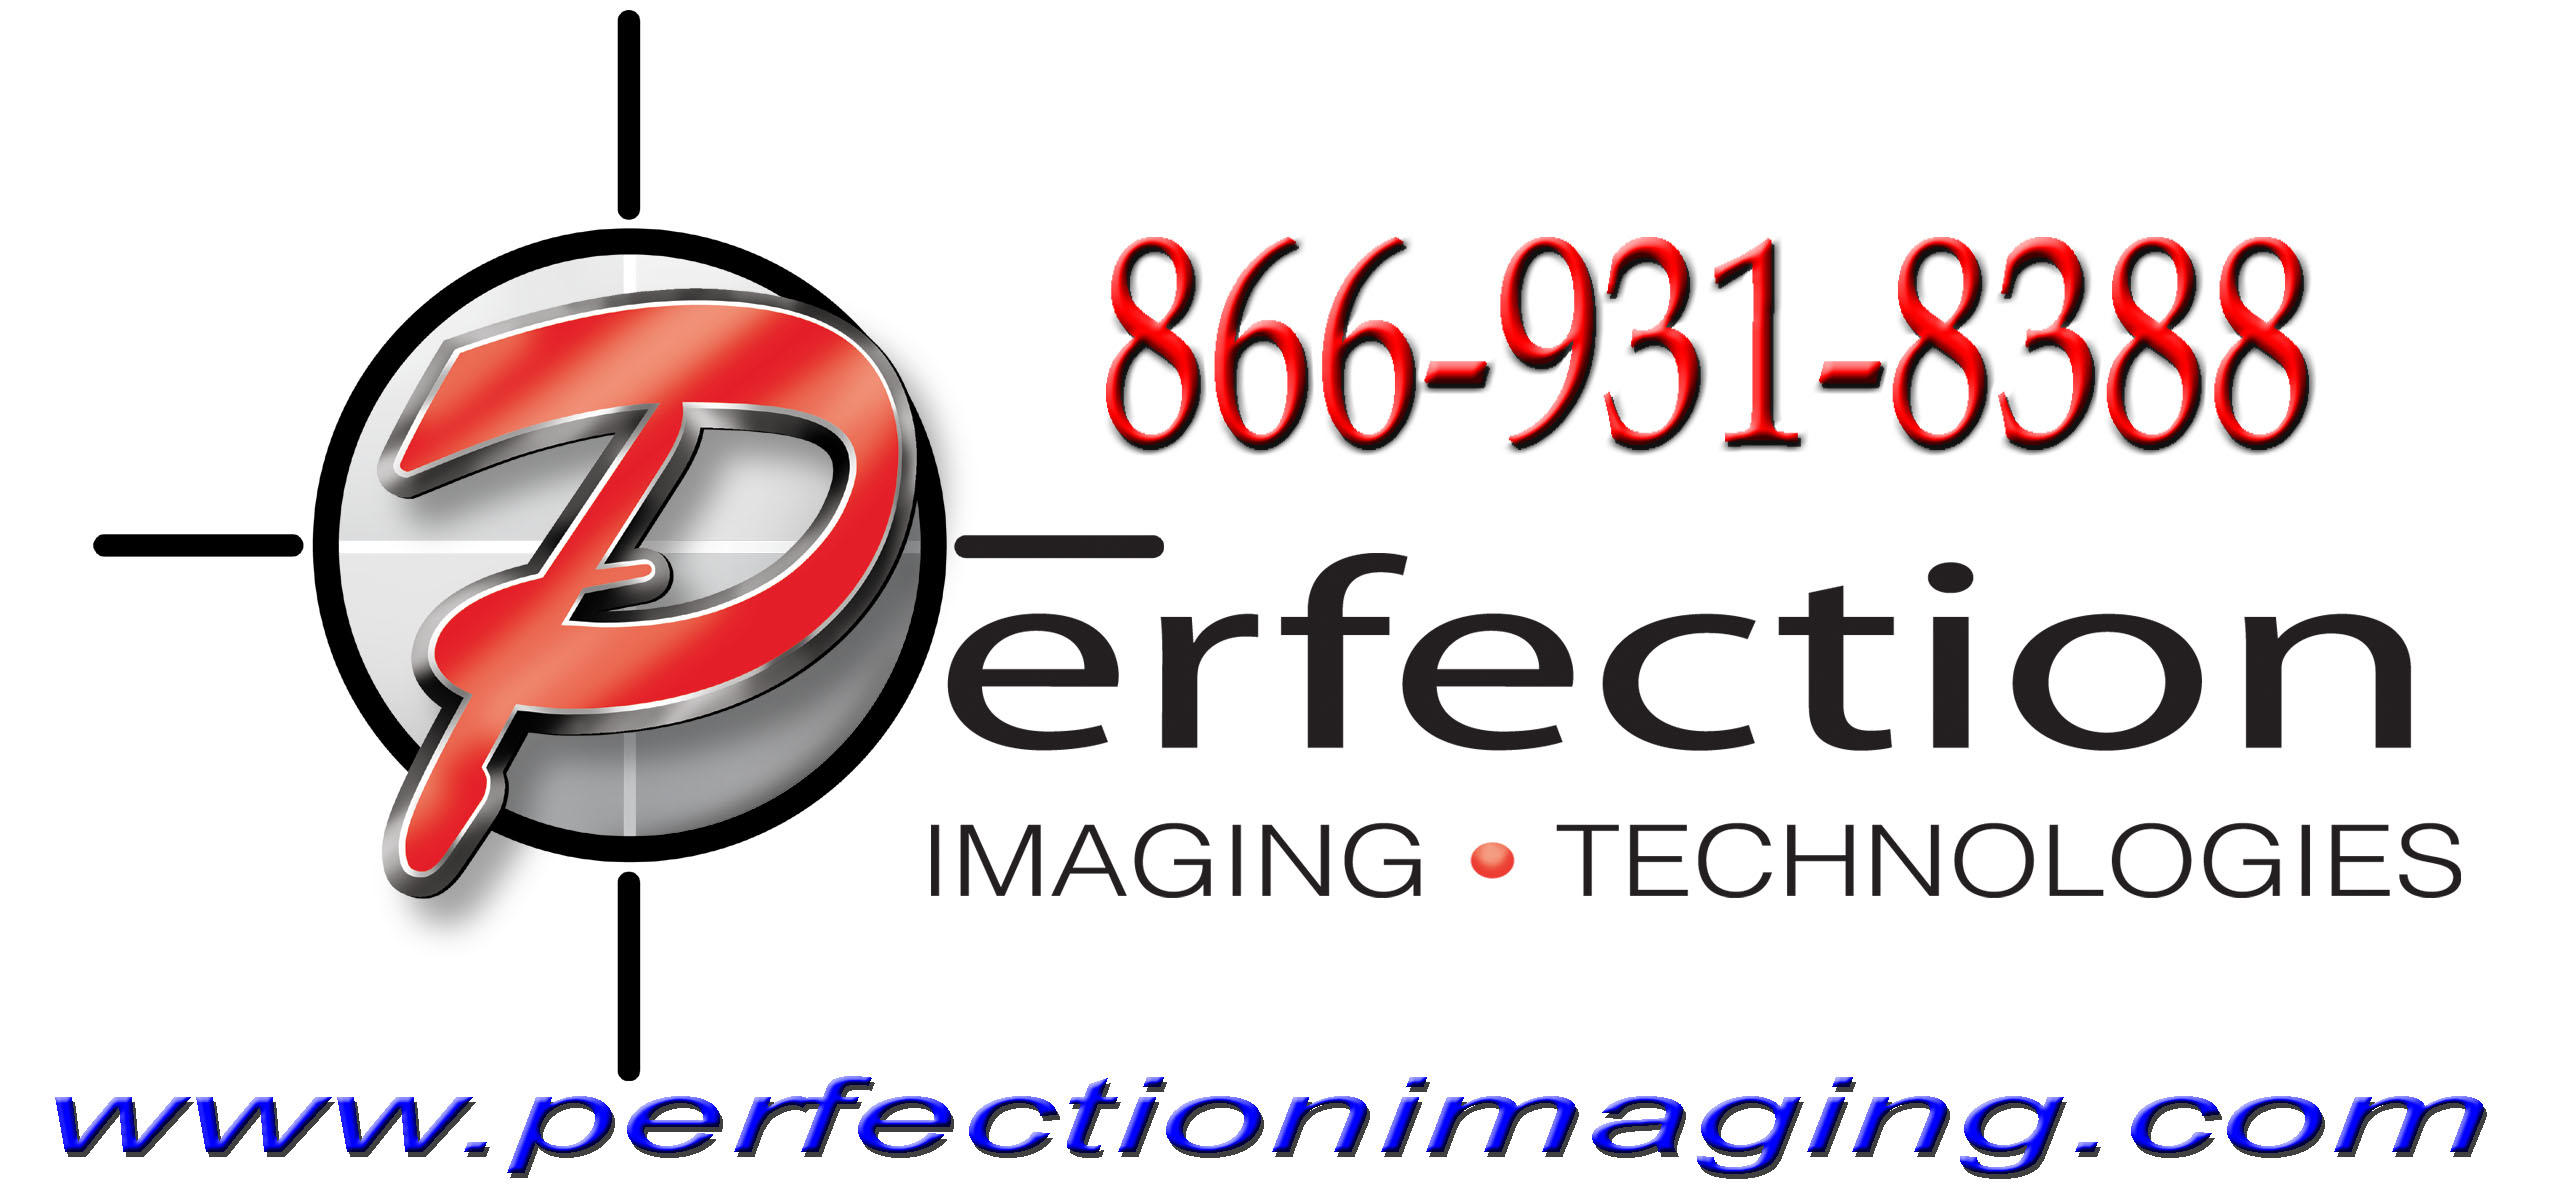 Perfection Imaging Technologies Photo